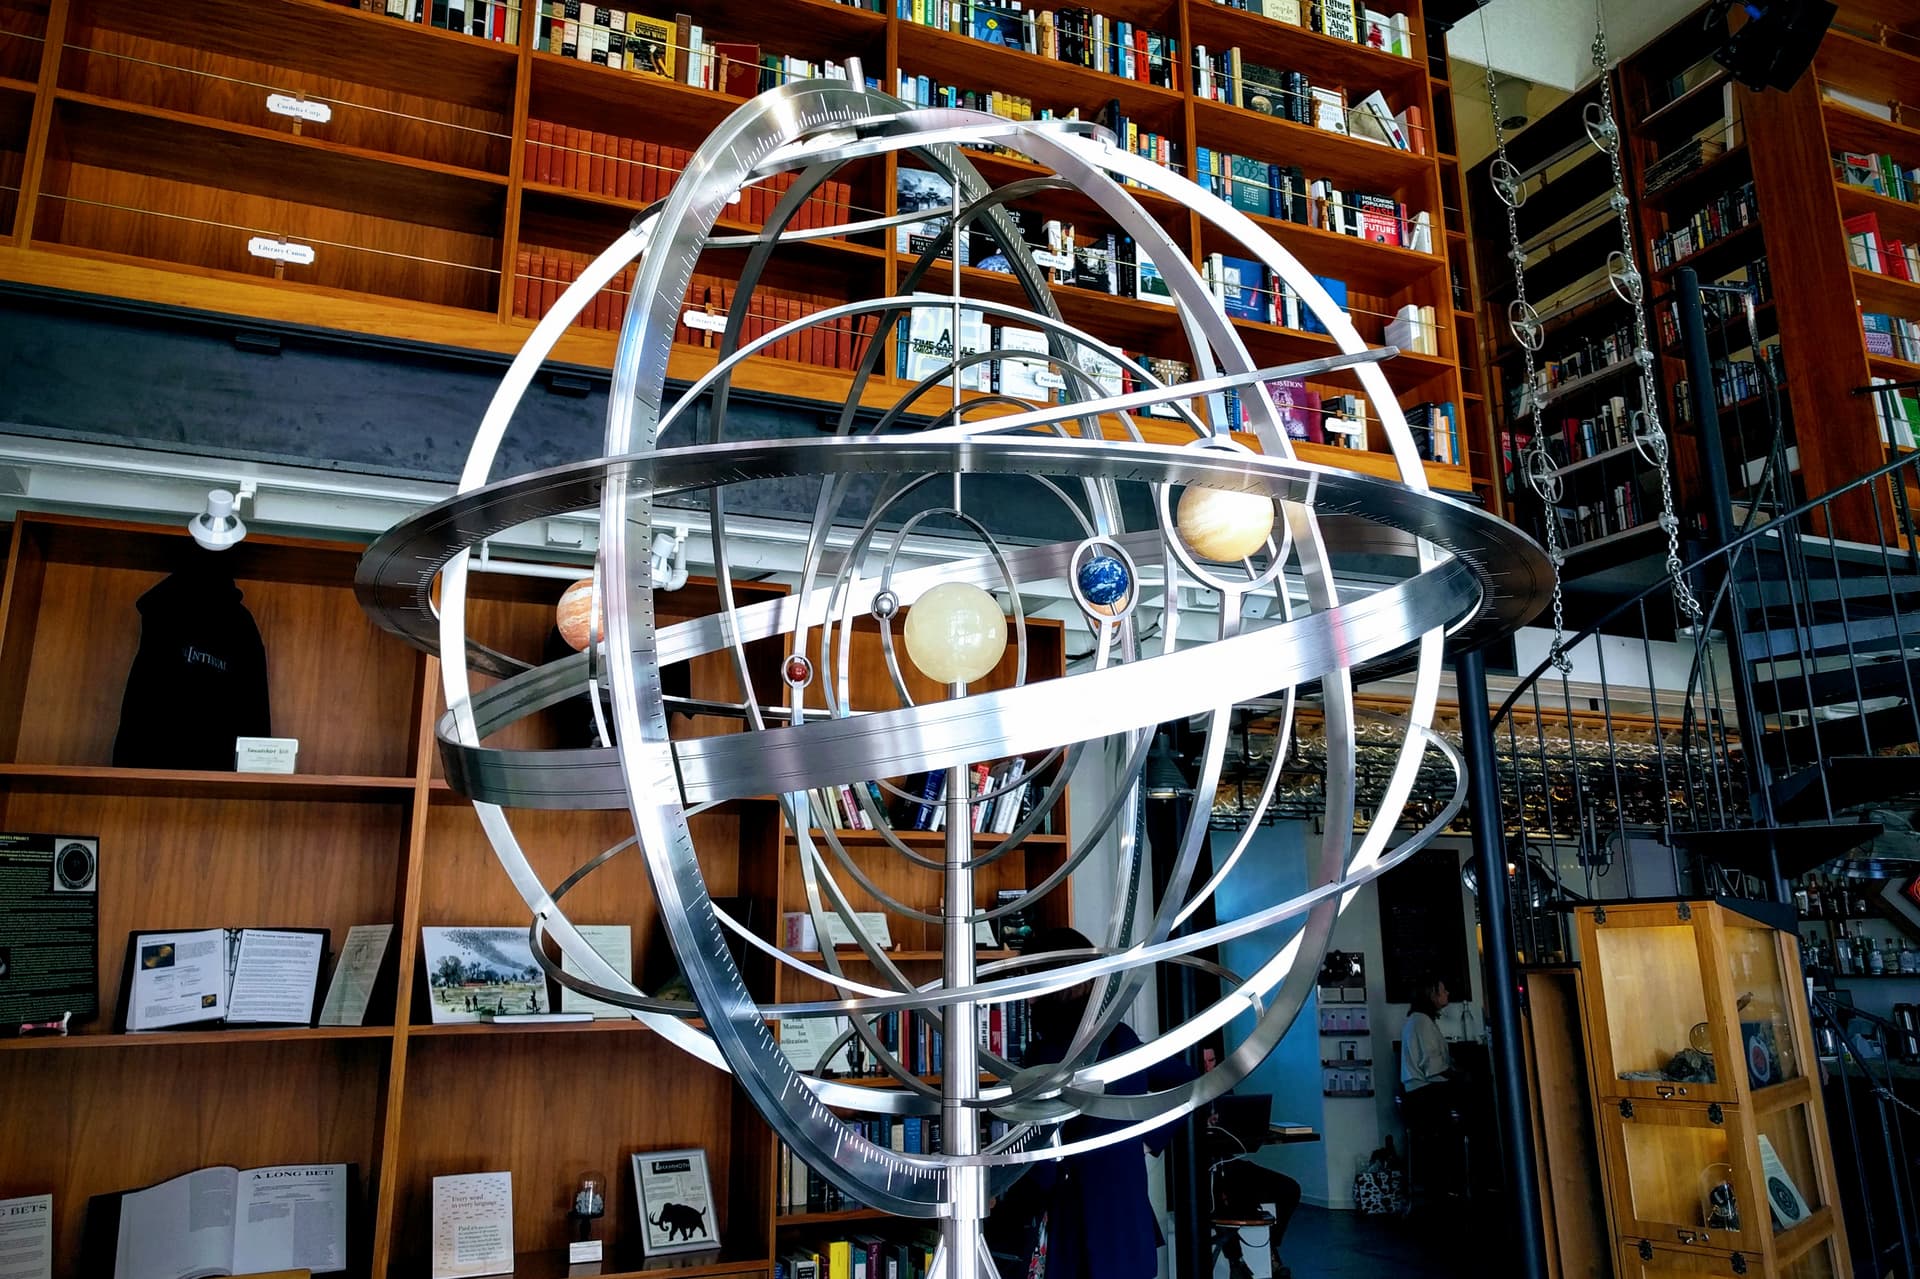 A spherical orrery made out of polished steal and stone at The Interval in San Francisco. Behind it are two floors of bookshelves and a spiral iron staircase.